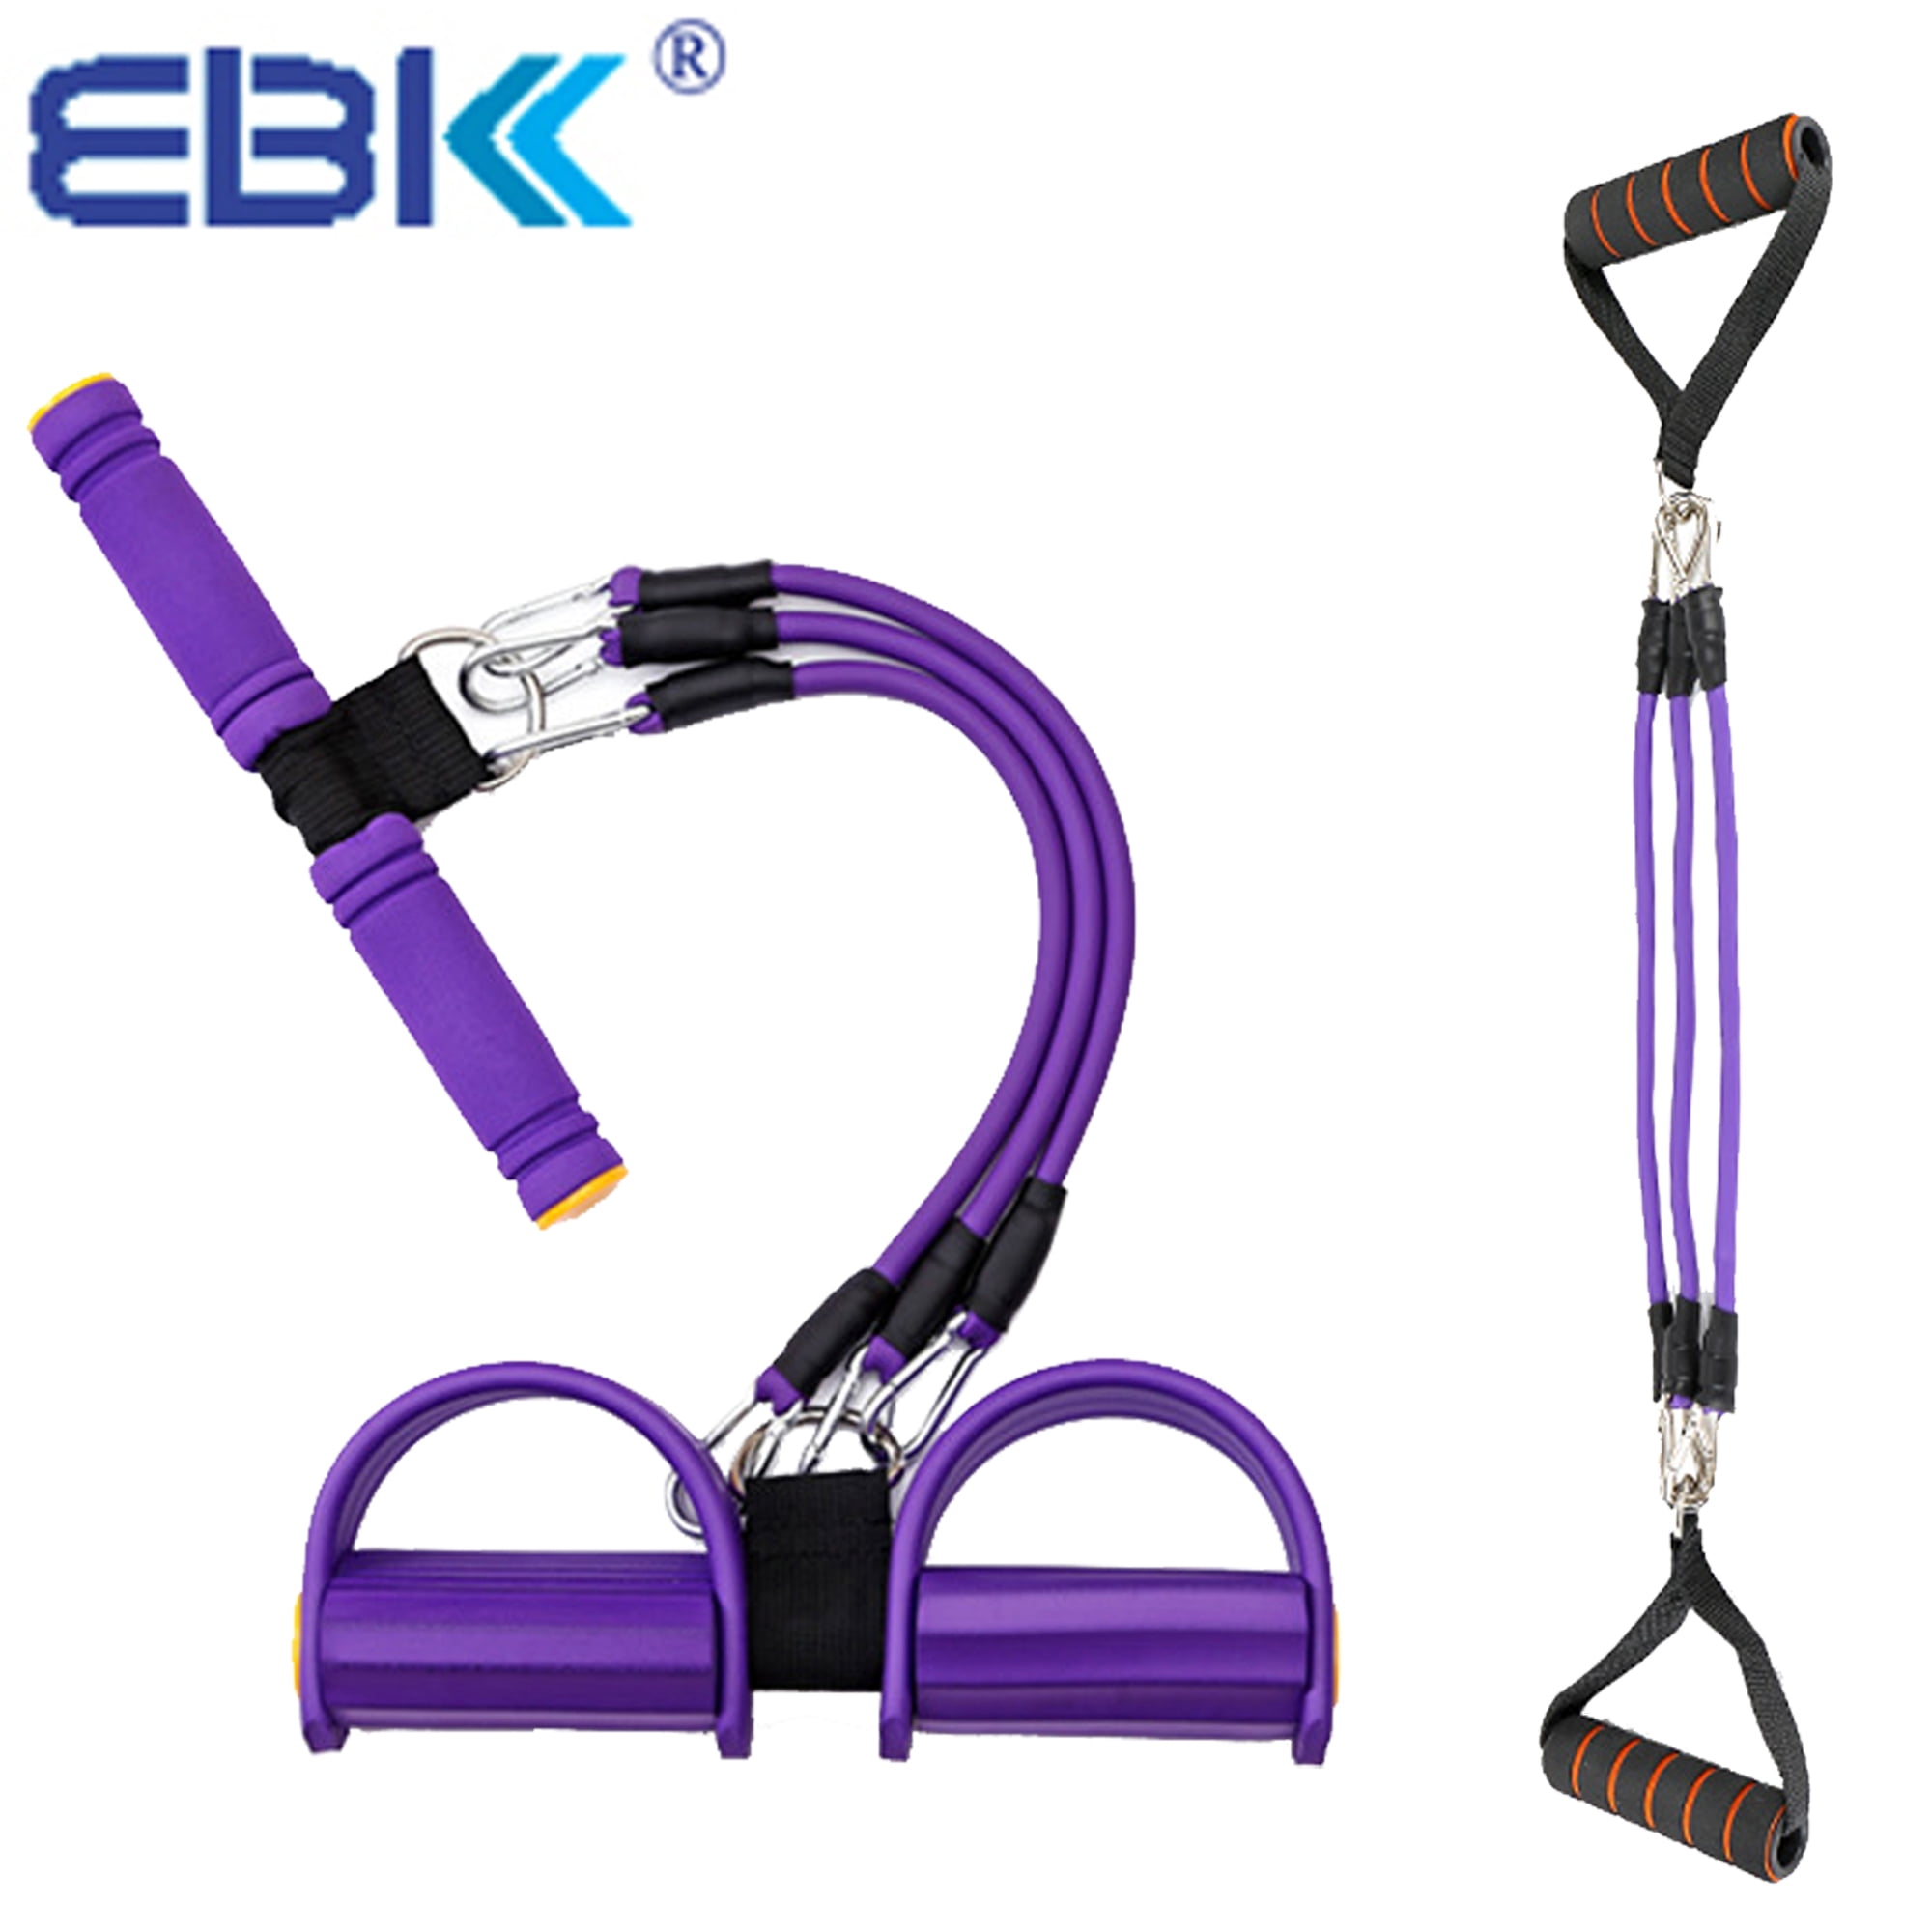 Ebk Trading Fitness Sit-up Exercise Equipment chest expander Resistance  Bands for Home Gym Yoga Workout Multifunction Arm chest Leg Exercise  Abdominal 